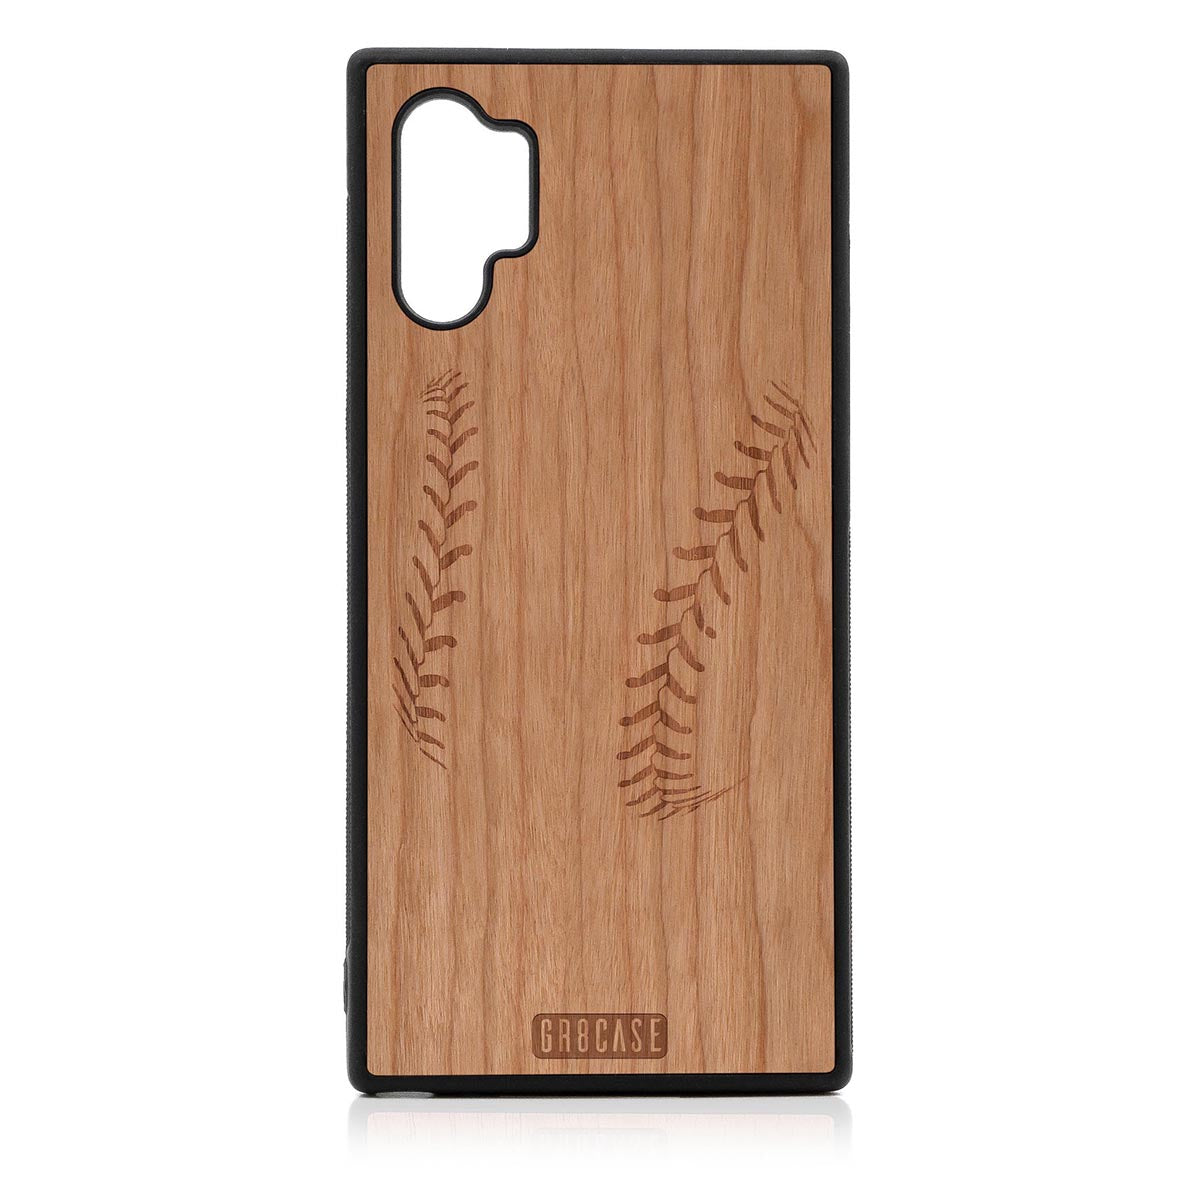 Baseball Stitches Design Wood Case For Samsung Galaxy Note 10 Plus by GR8CASE